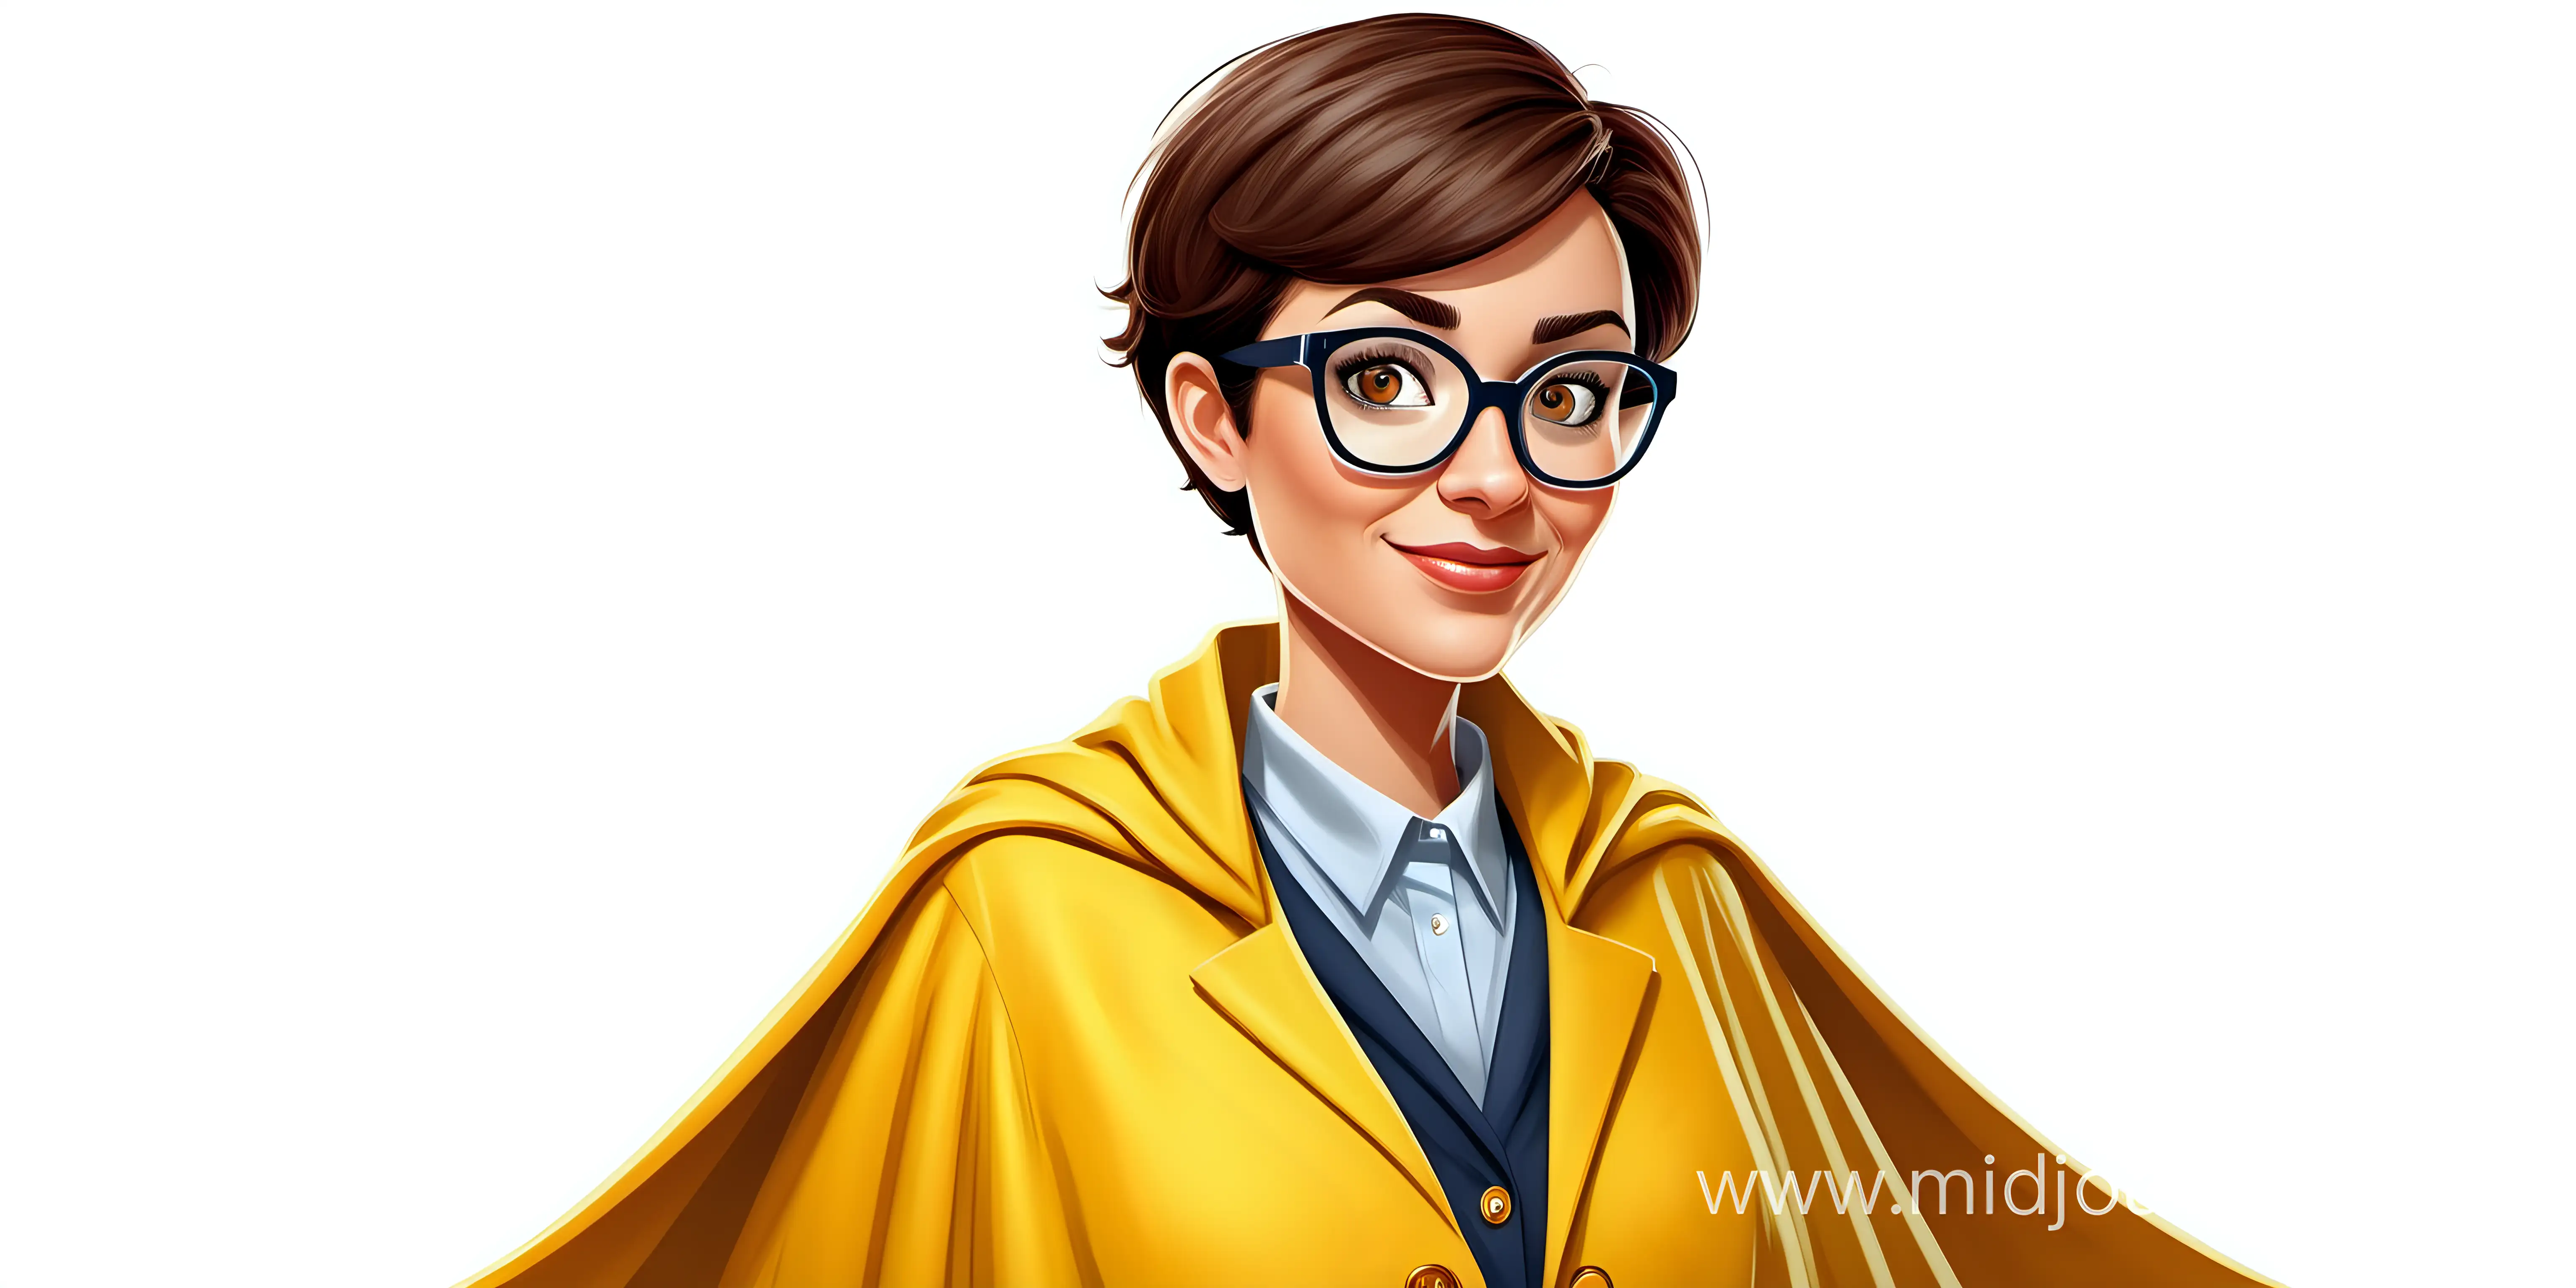 white background, cartoon character of a professional woman with short brown hair wearing glasses and a yellow blazer and a hero cape with a pleasant expression 

